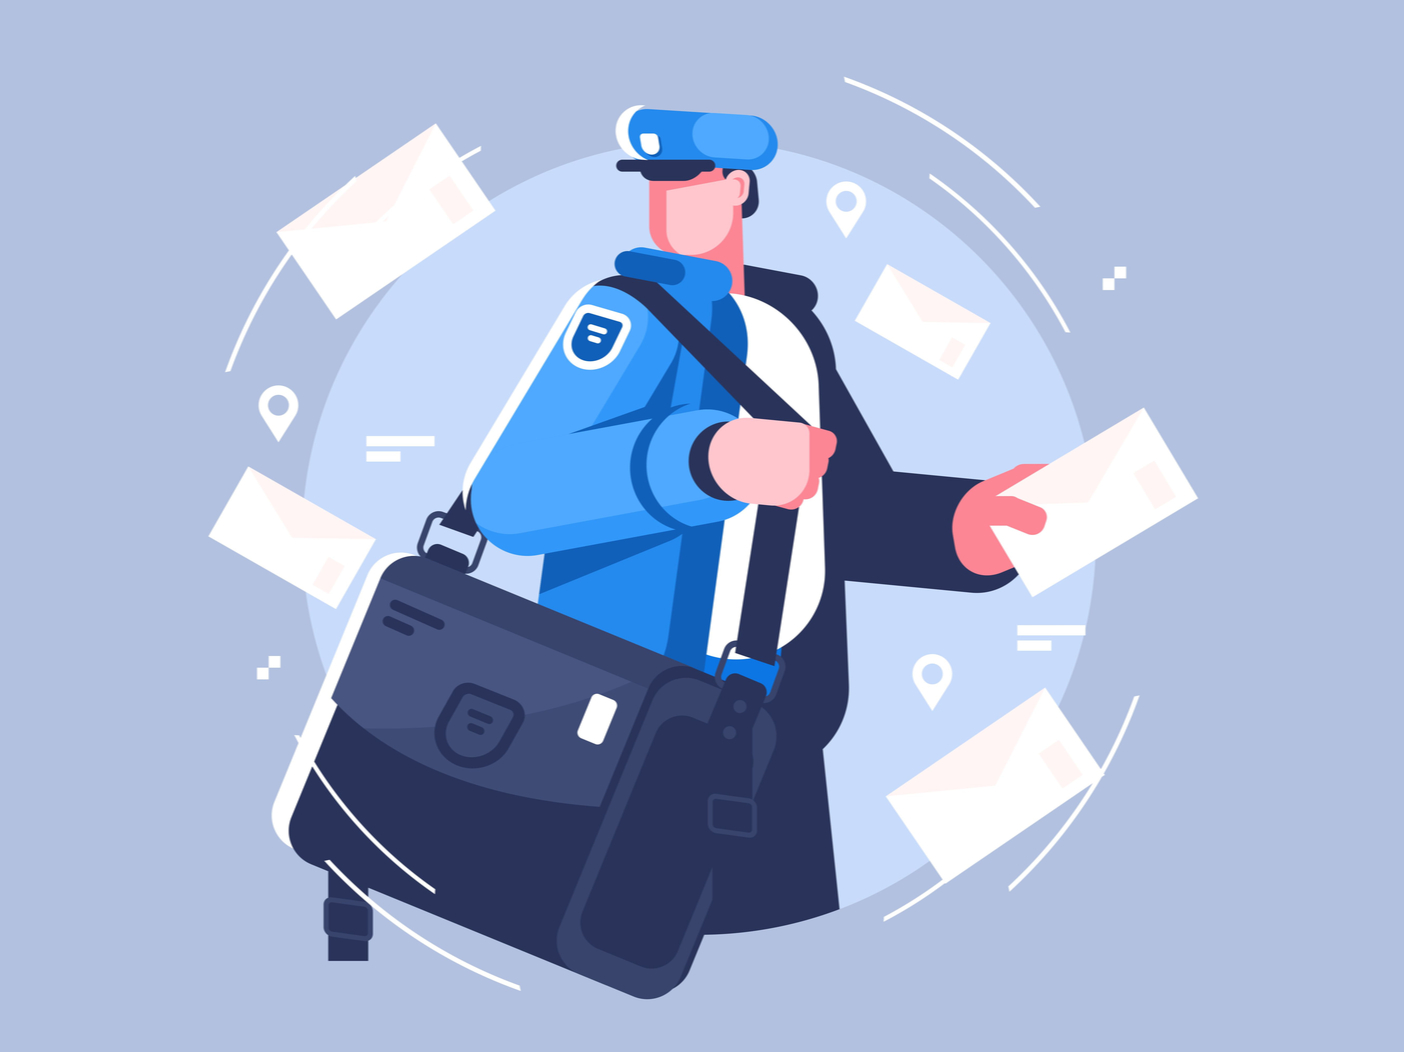 Postman with bag delivering letters vector illustation. Cartoon man in uniform holding mail flat style concept. Letters and mailman for profession and delivery service themes design